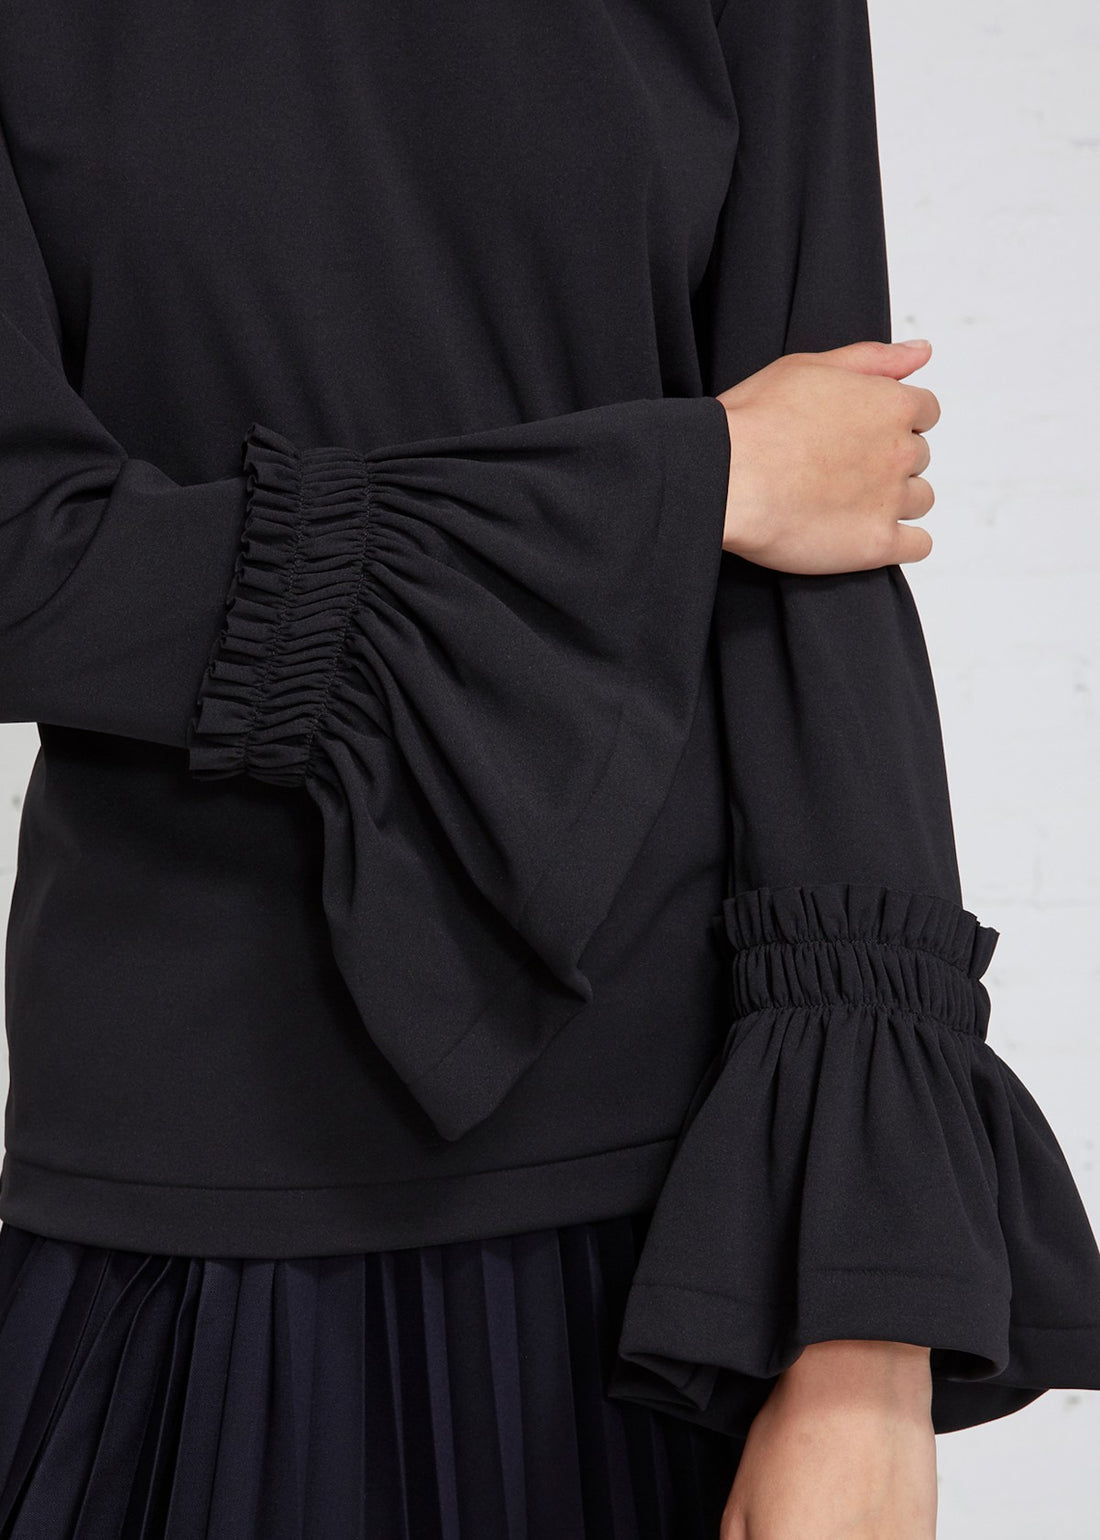 Comme des Garcons Black Shirt with Ruffle Cuffs - L